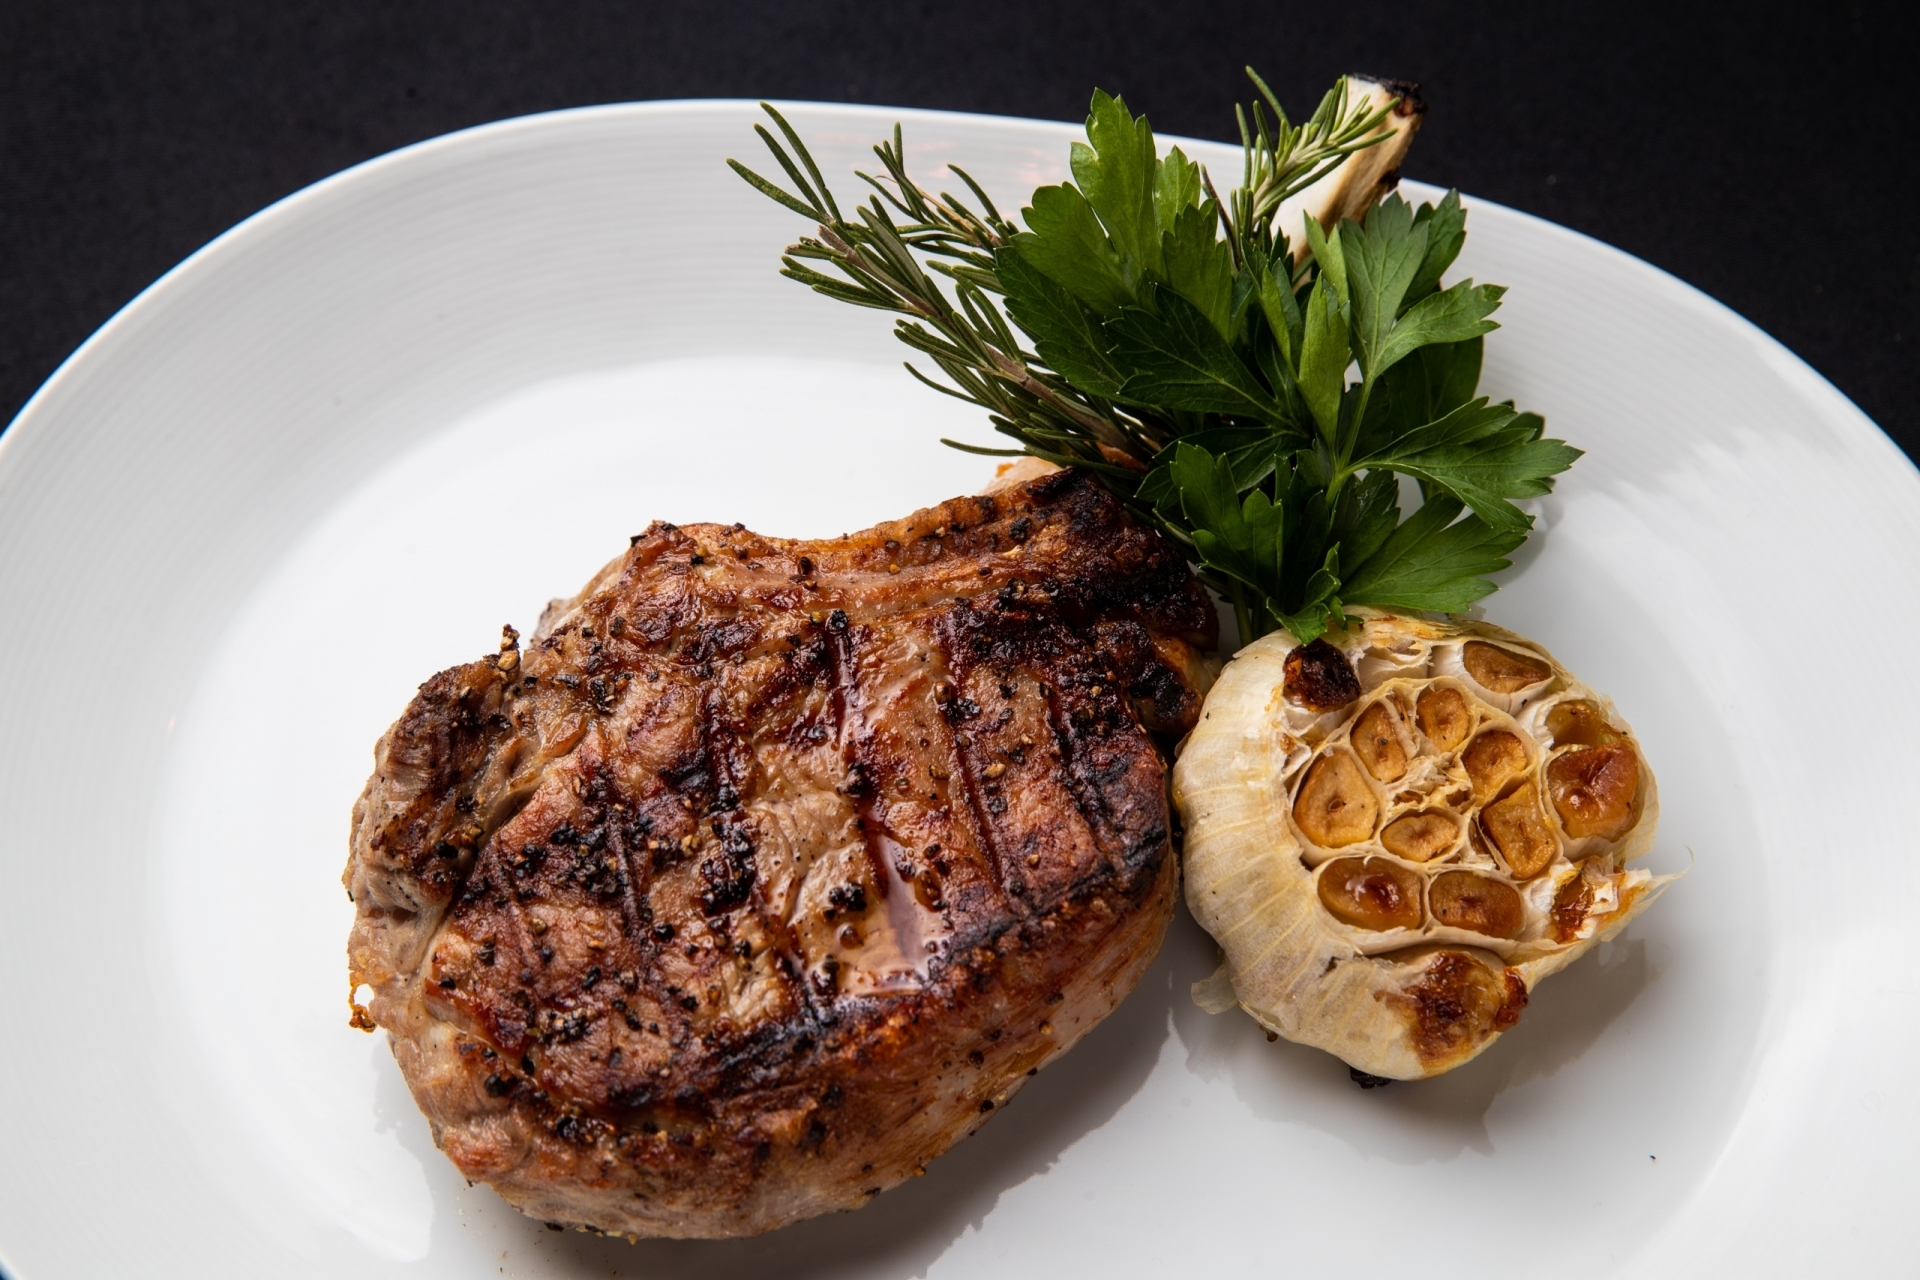 Grilled Veal Chop with herb roasted garlic